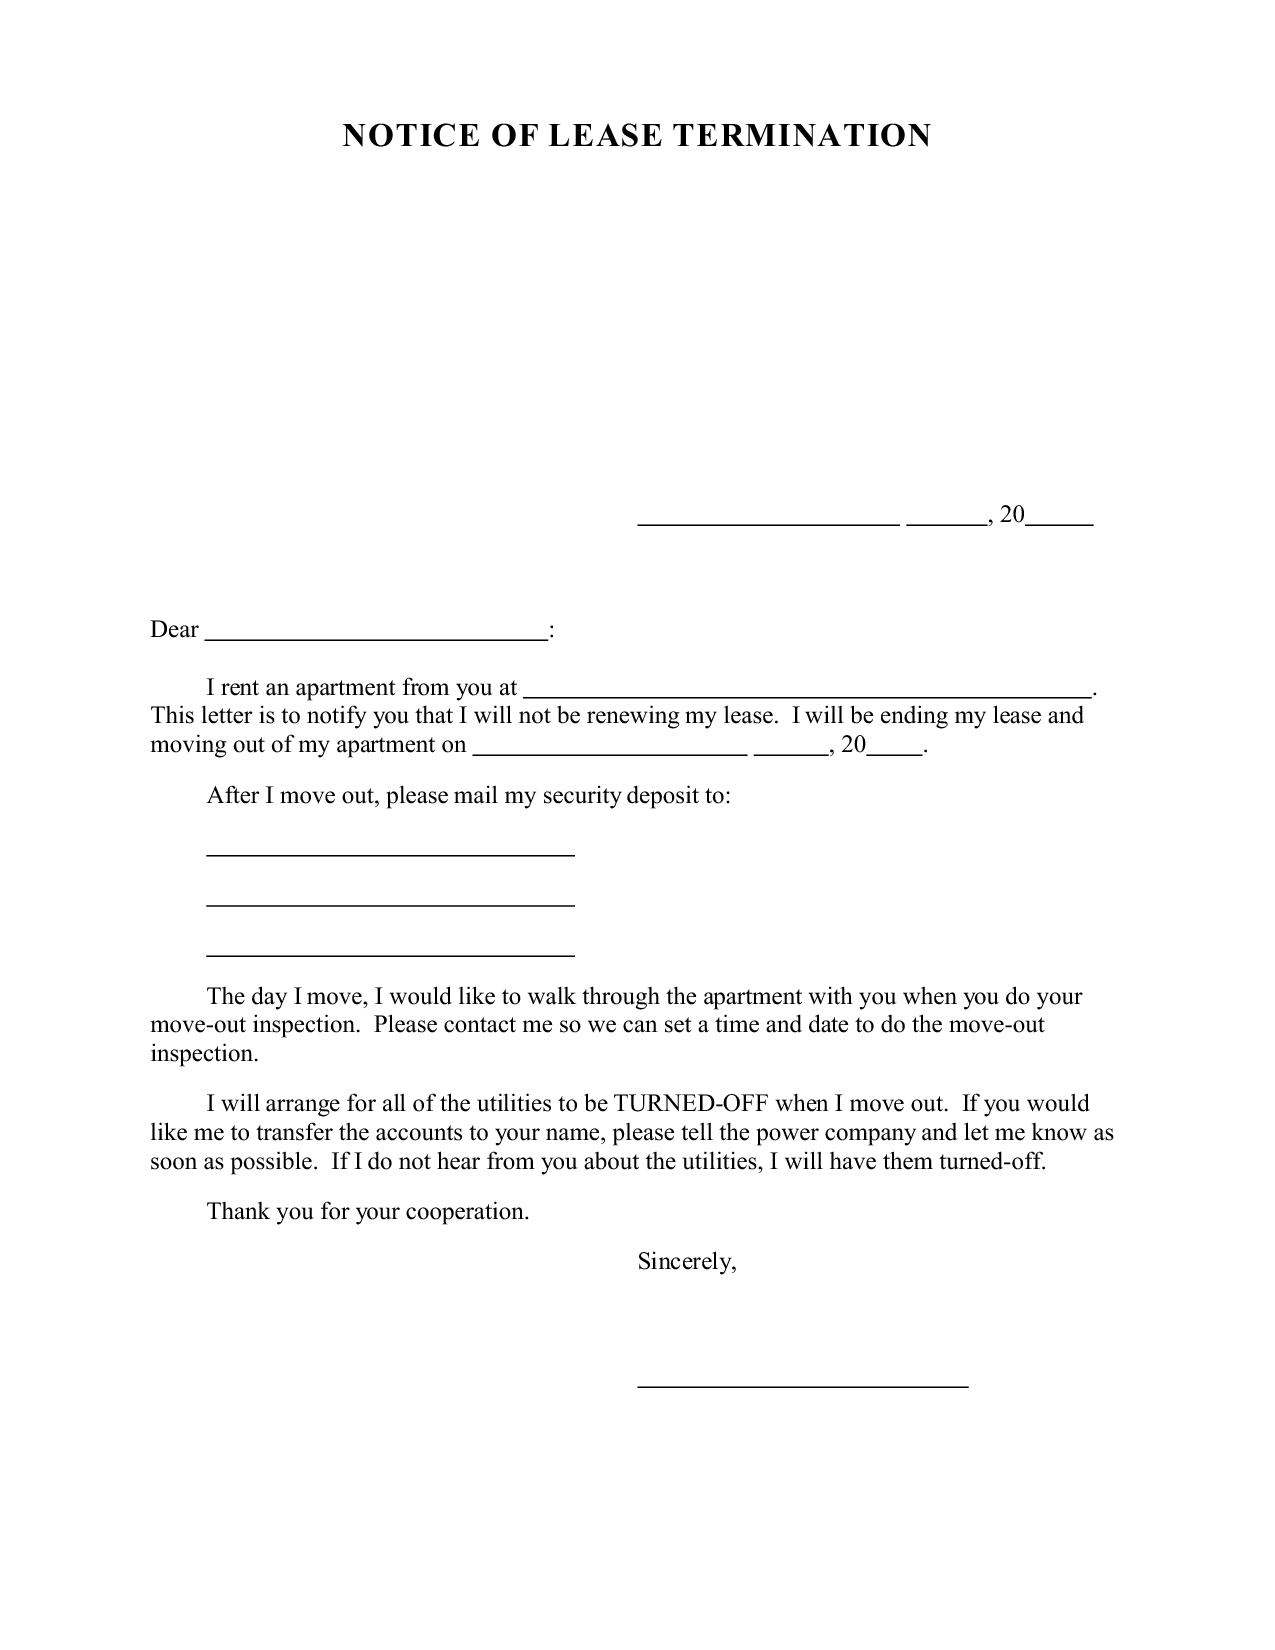 Lease Release Letter - Free Printable Documents